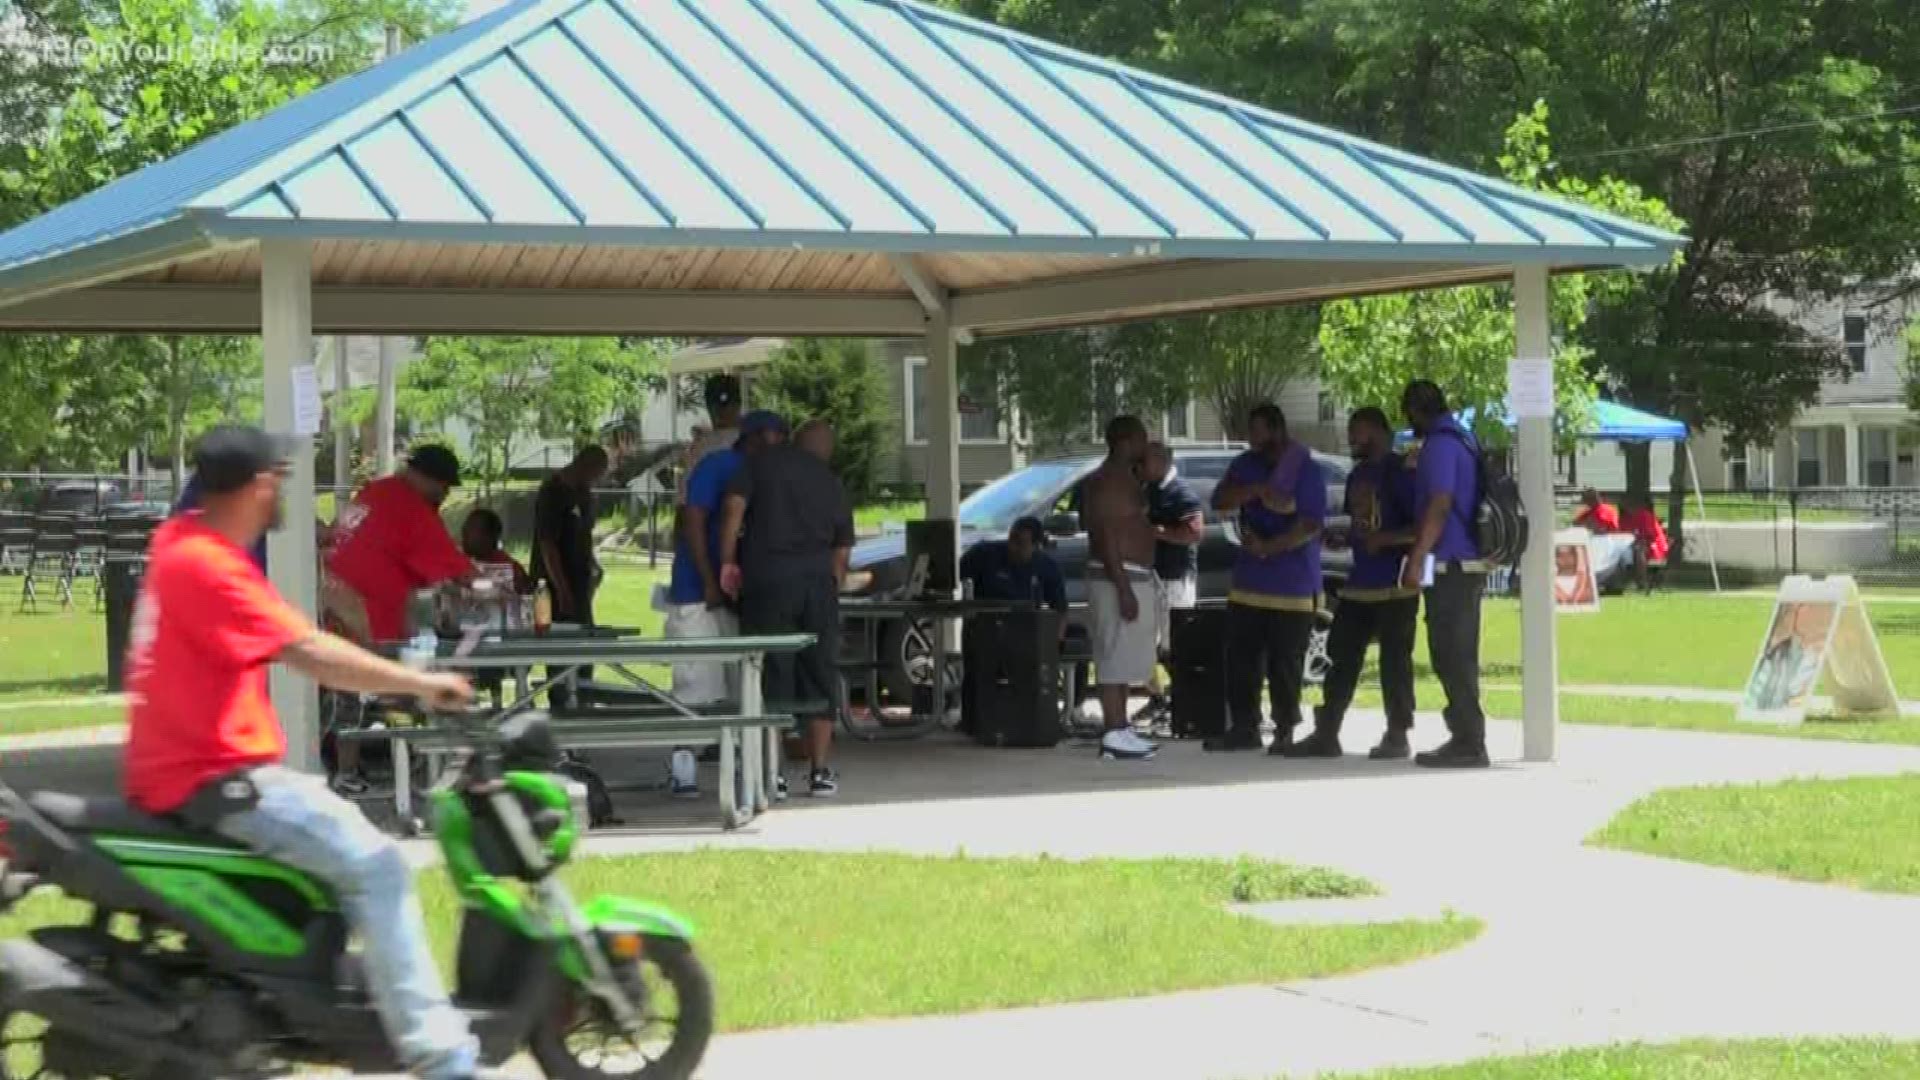 Community holds BBQ to address recent Grand Rapids shootings